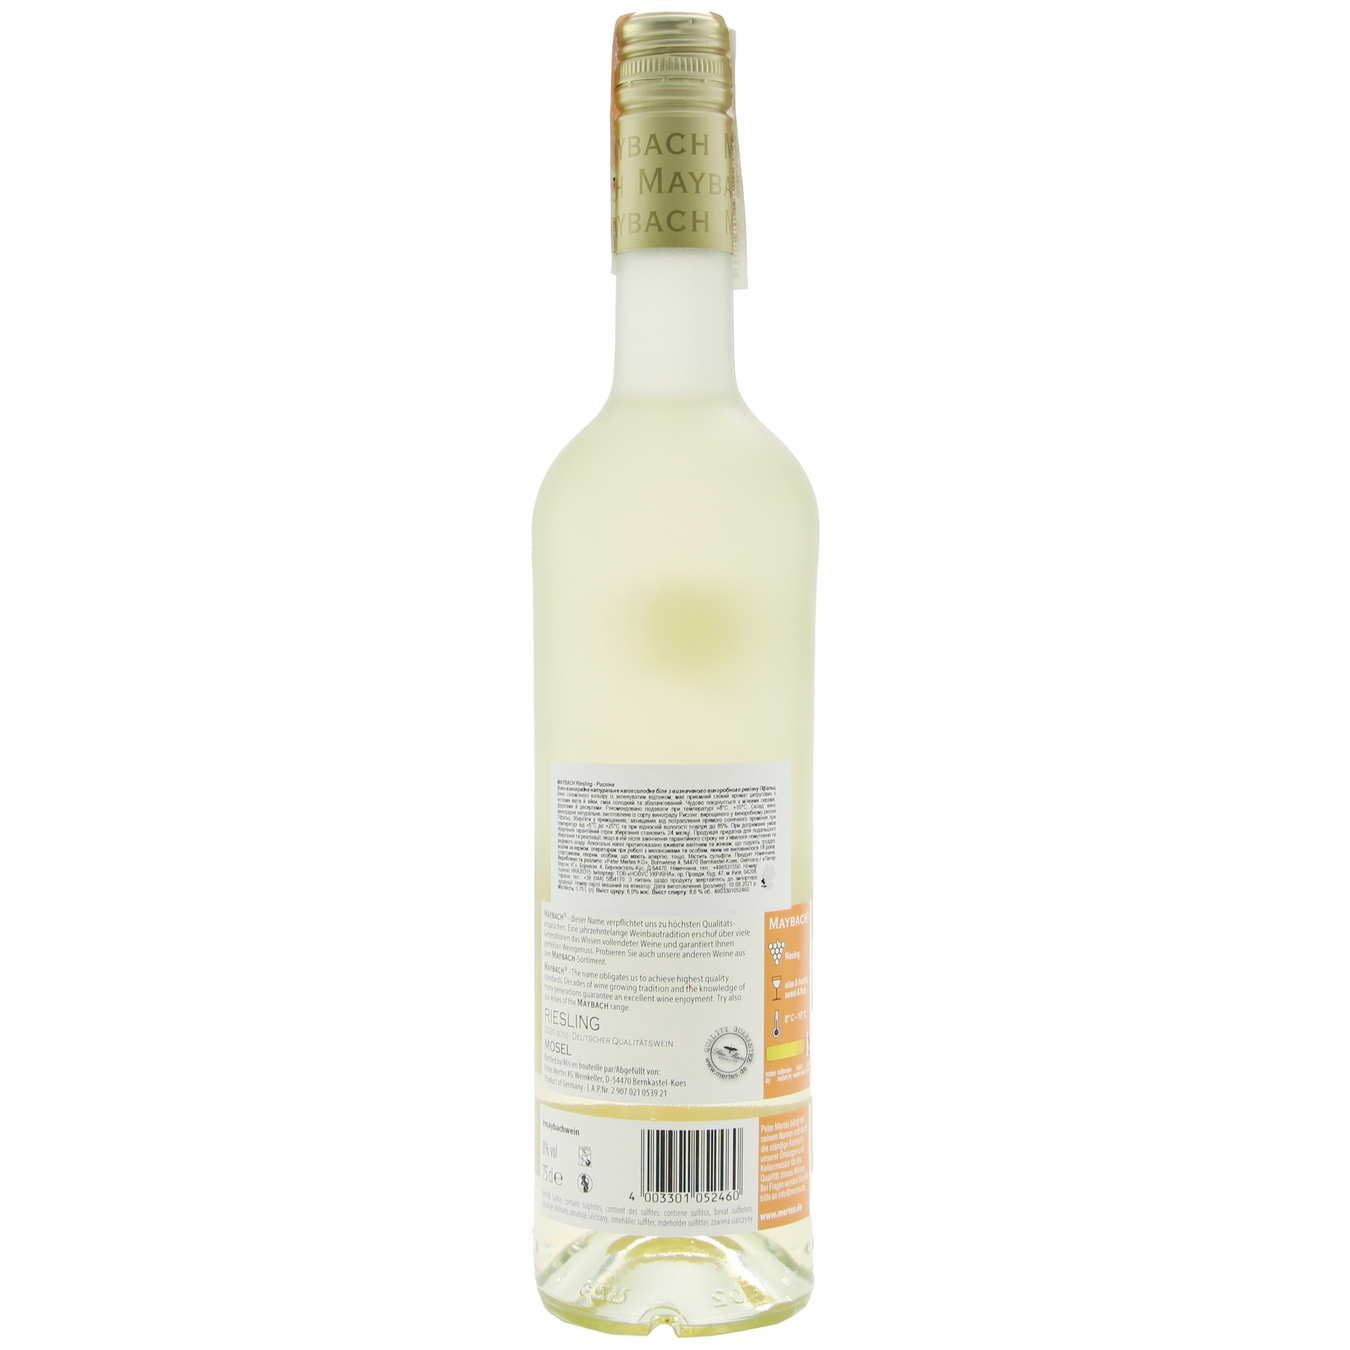 Wine Maybach Riesling Suss&Fruchtig white sweet 9,5% 0,75l 2